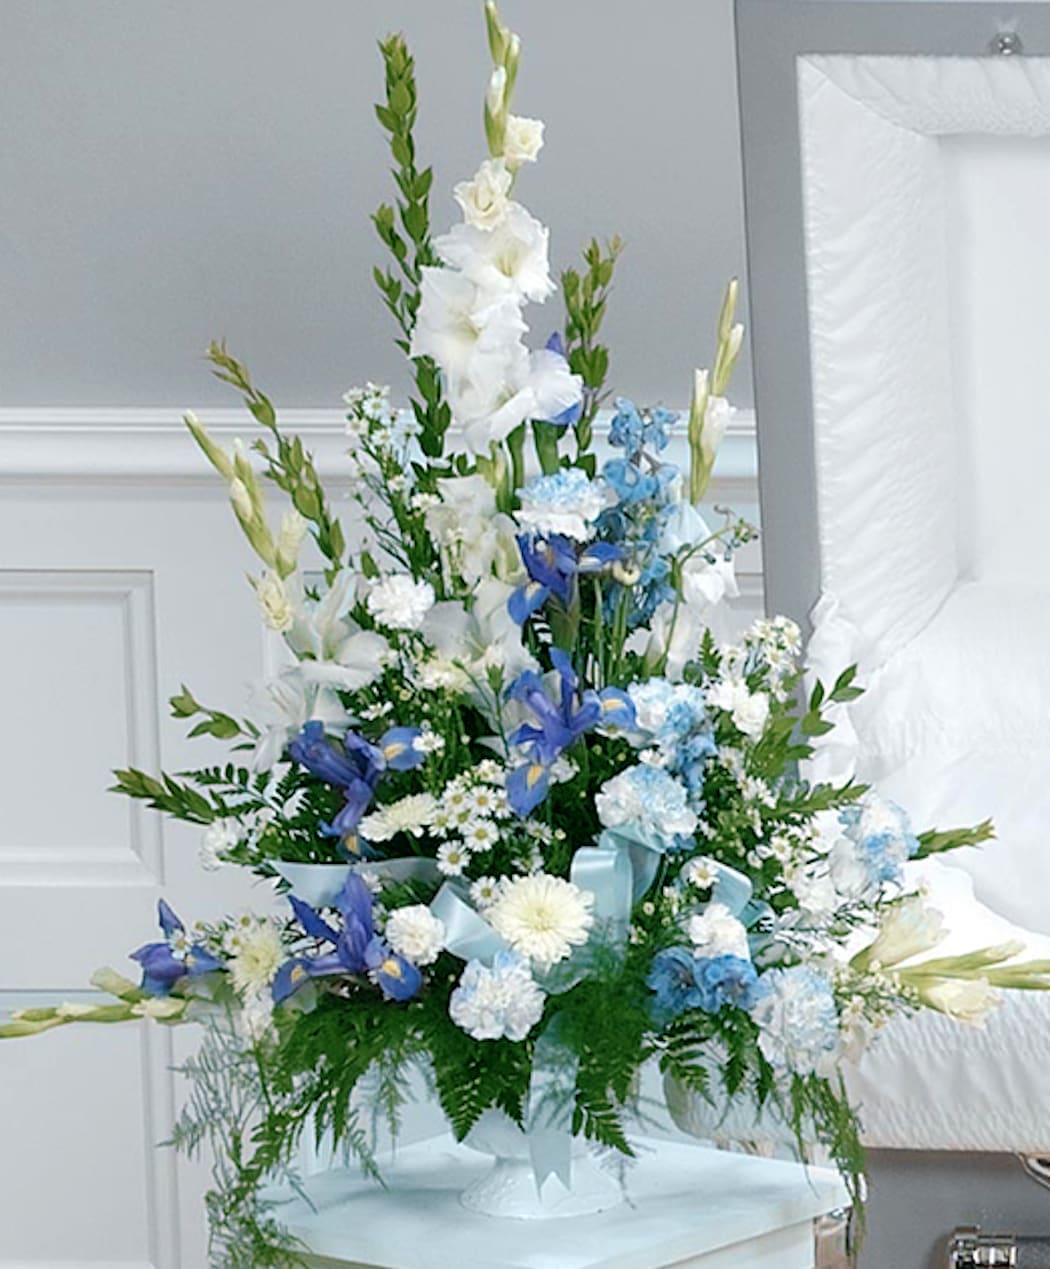 Gracious Glory Shades of Blue - Pedestal arrangement including delphinium, iris and carnations with white gladiolas and cushion mums. A beautiful piece to compliment any service and share condolences.